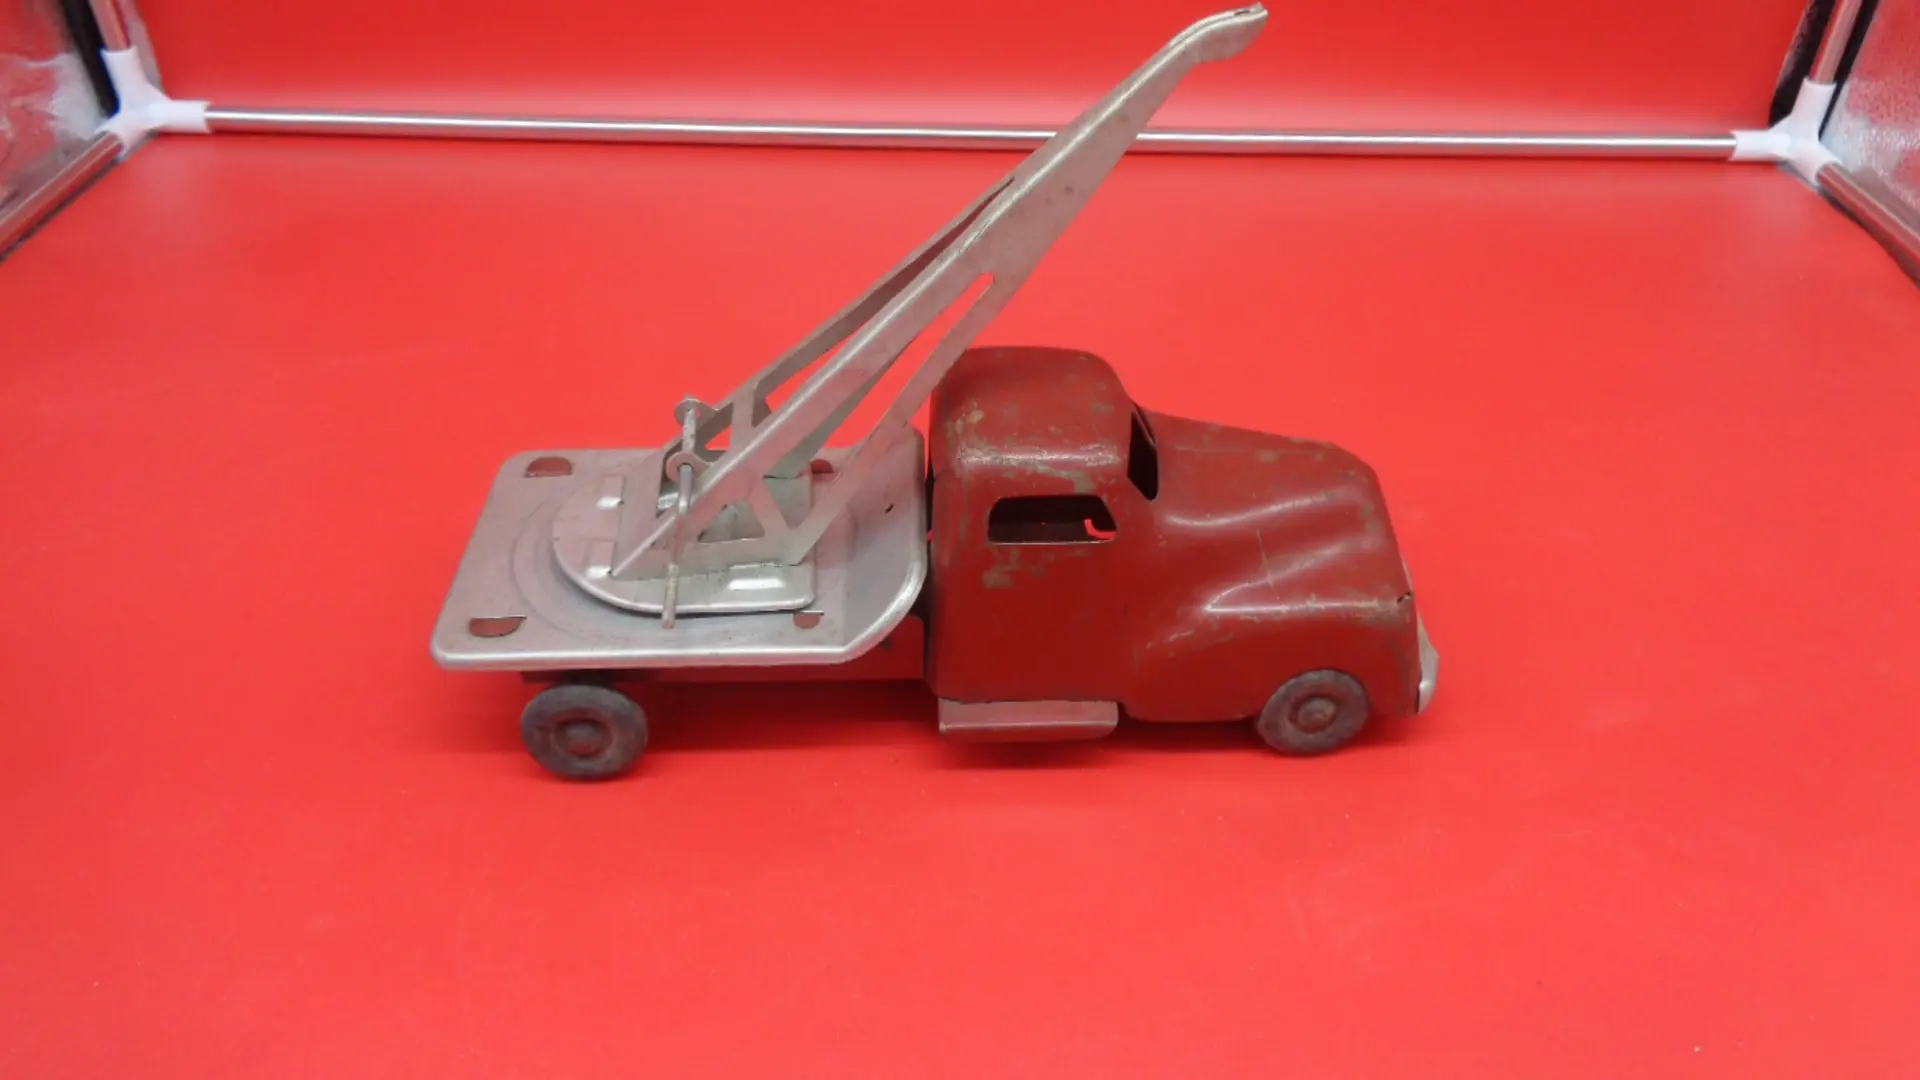 Vintage toy tow truck